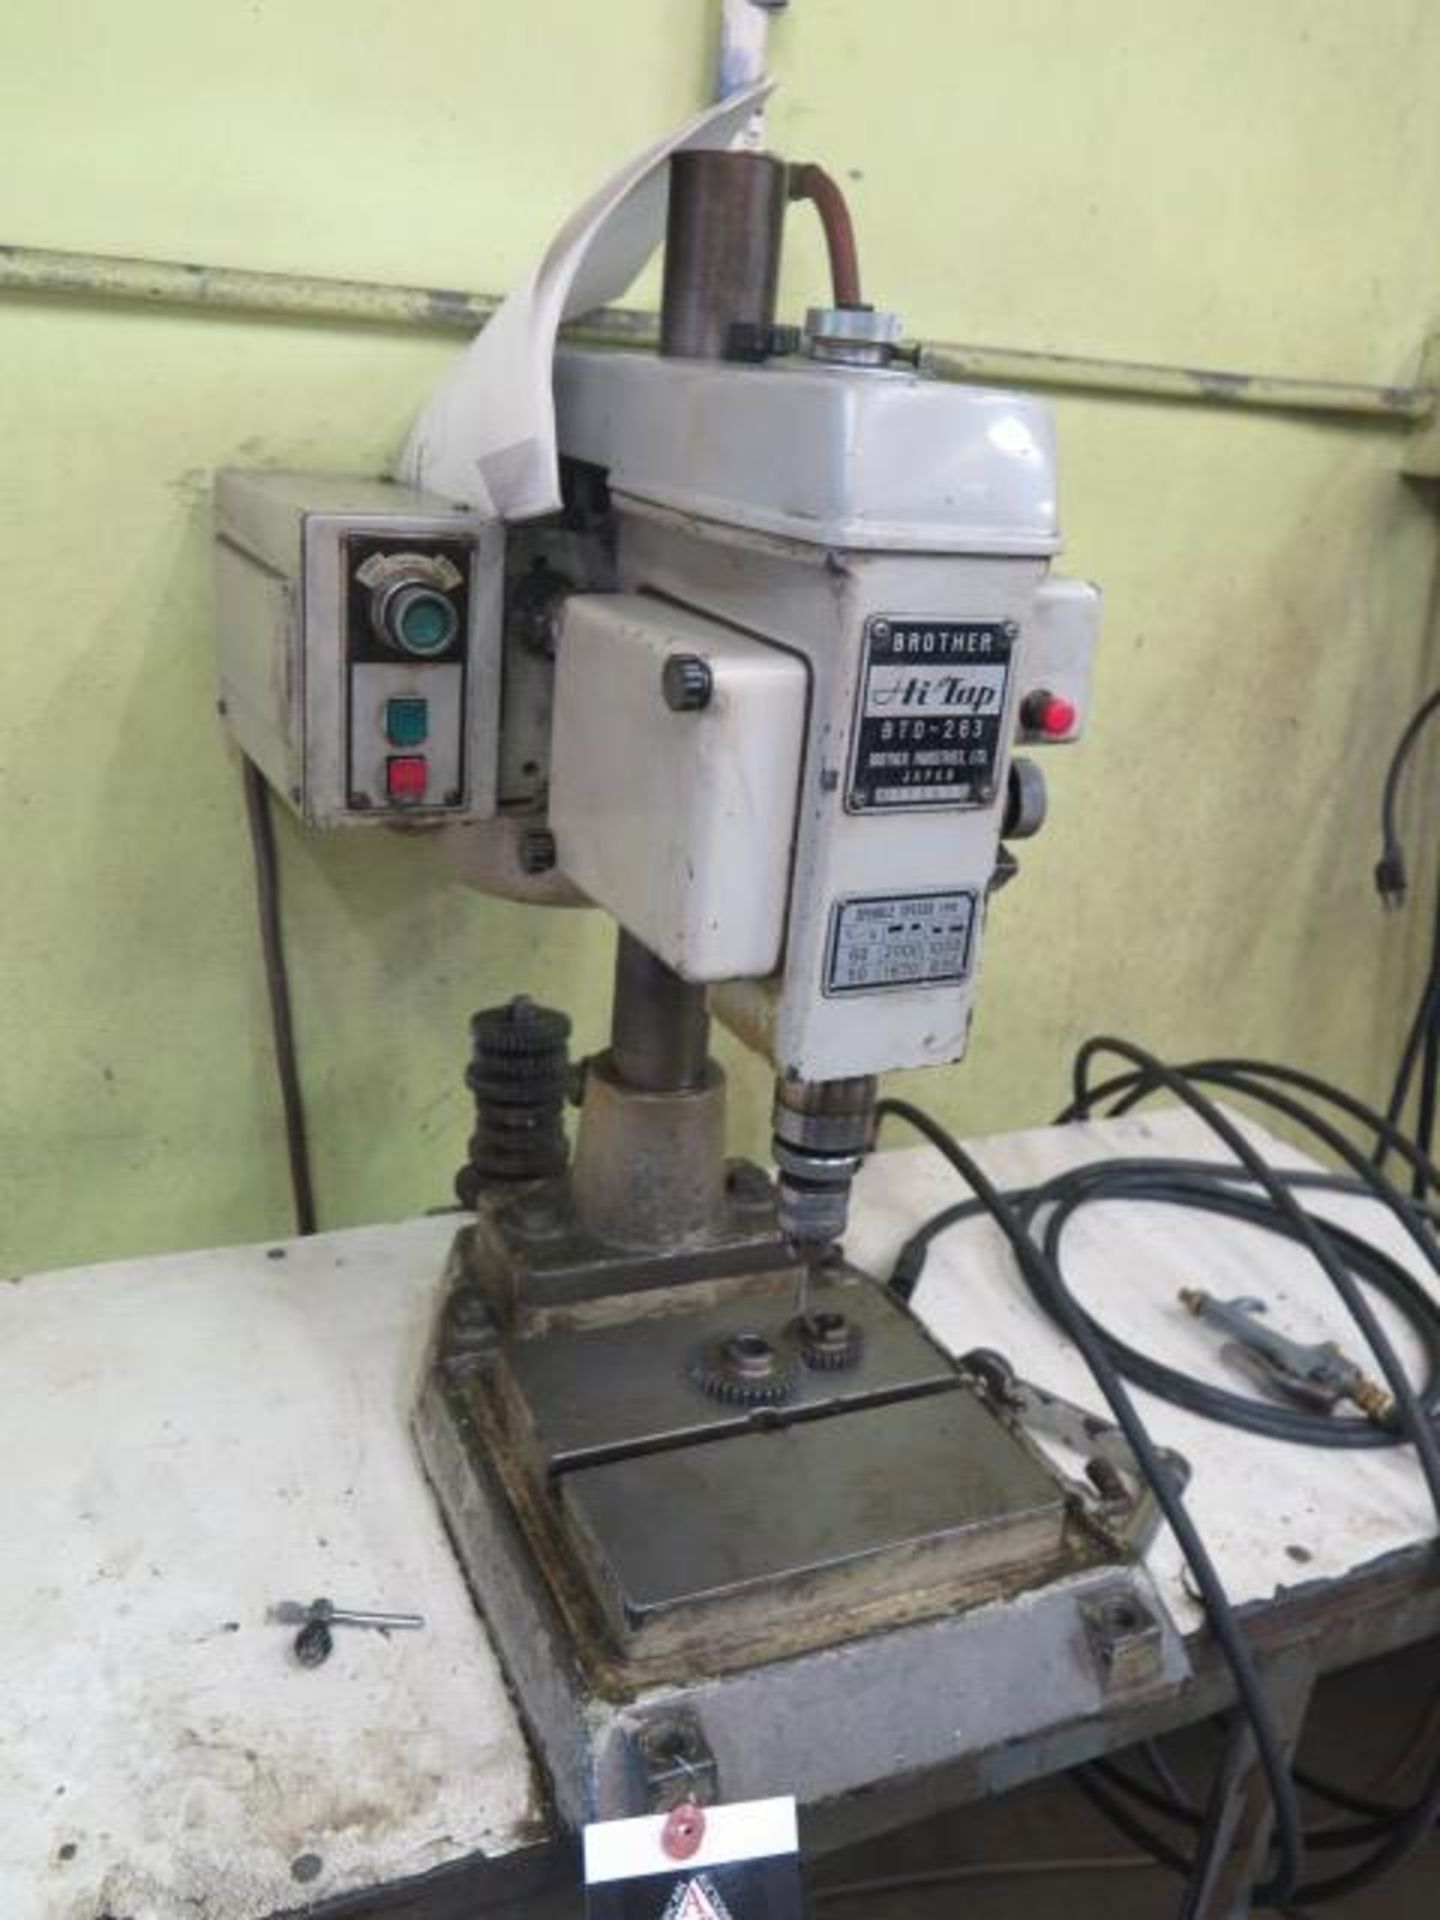 Brother “Hi-Tap” BTO-263 Geared Head Tapping Machine s/n 111971 (SOLD AS-IS - NO WARRANTY)